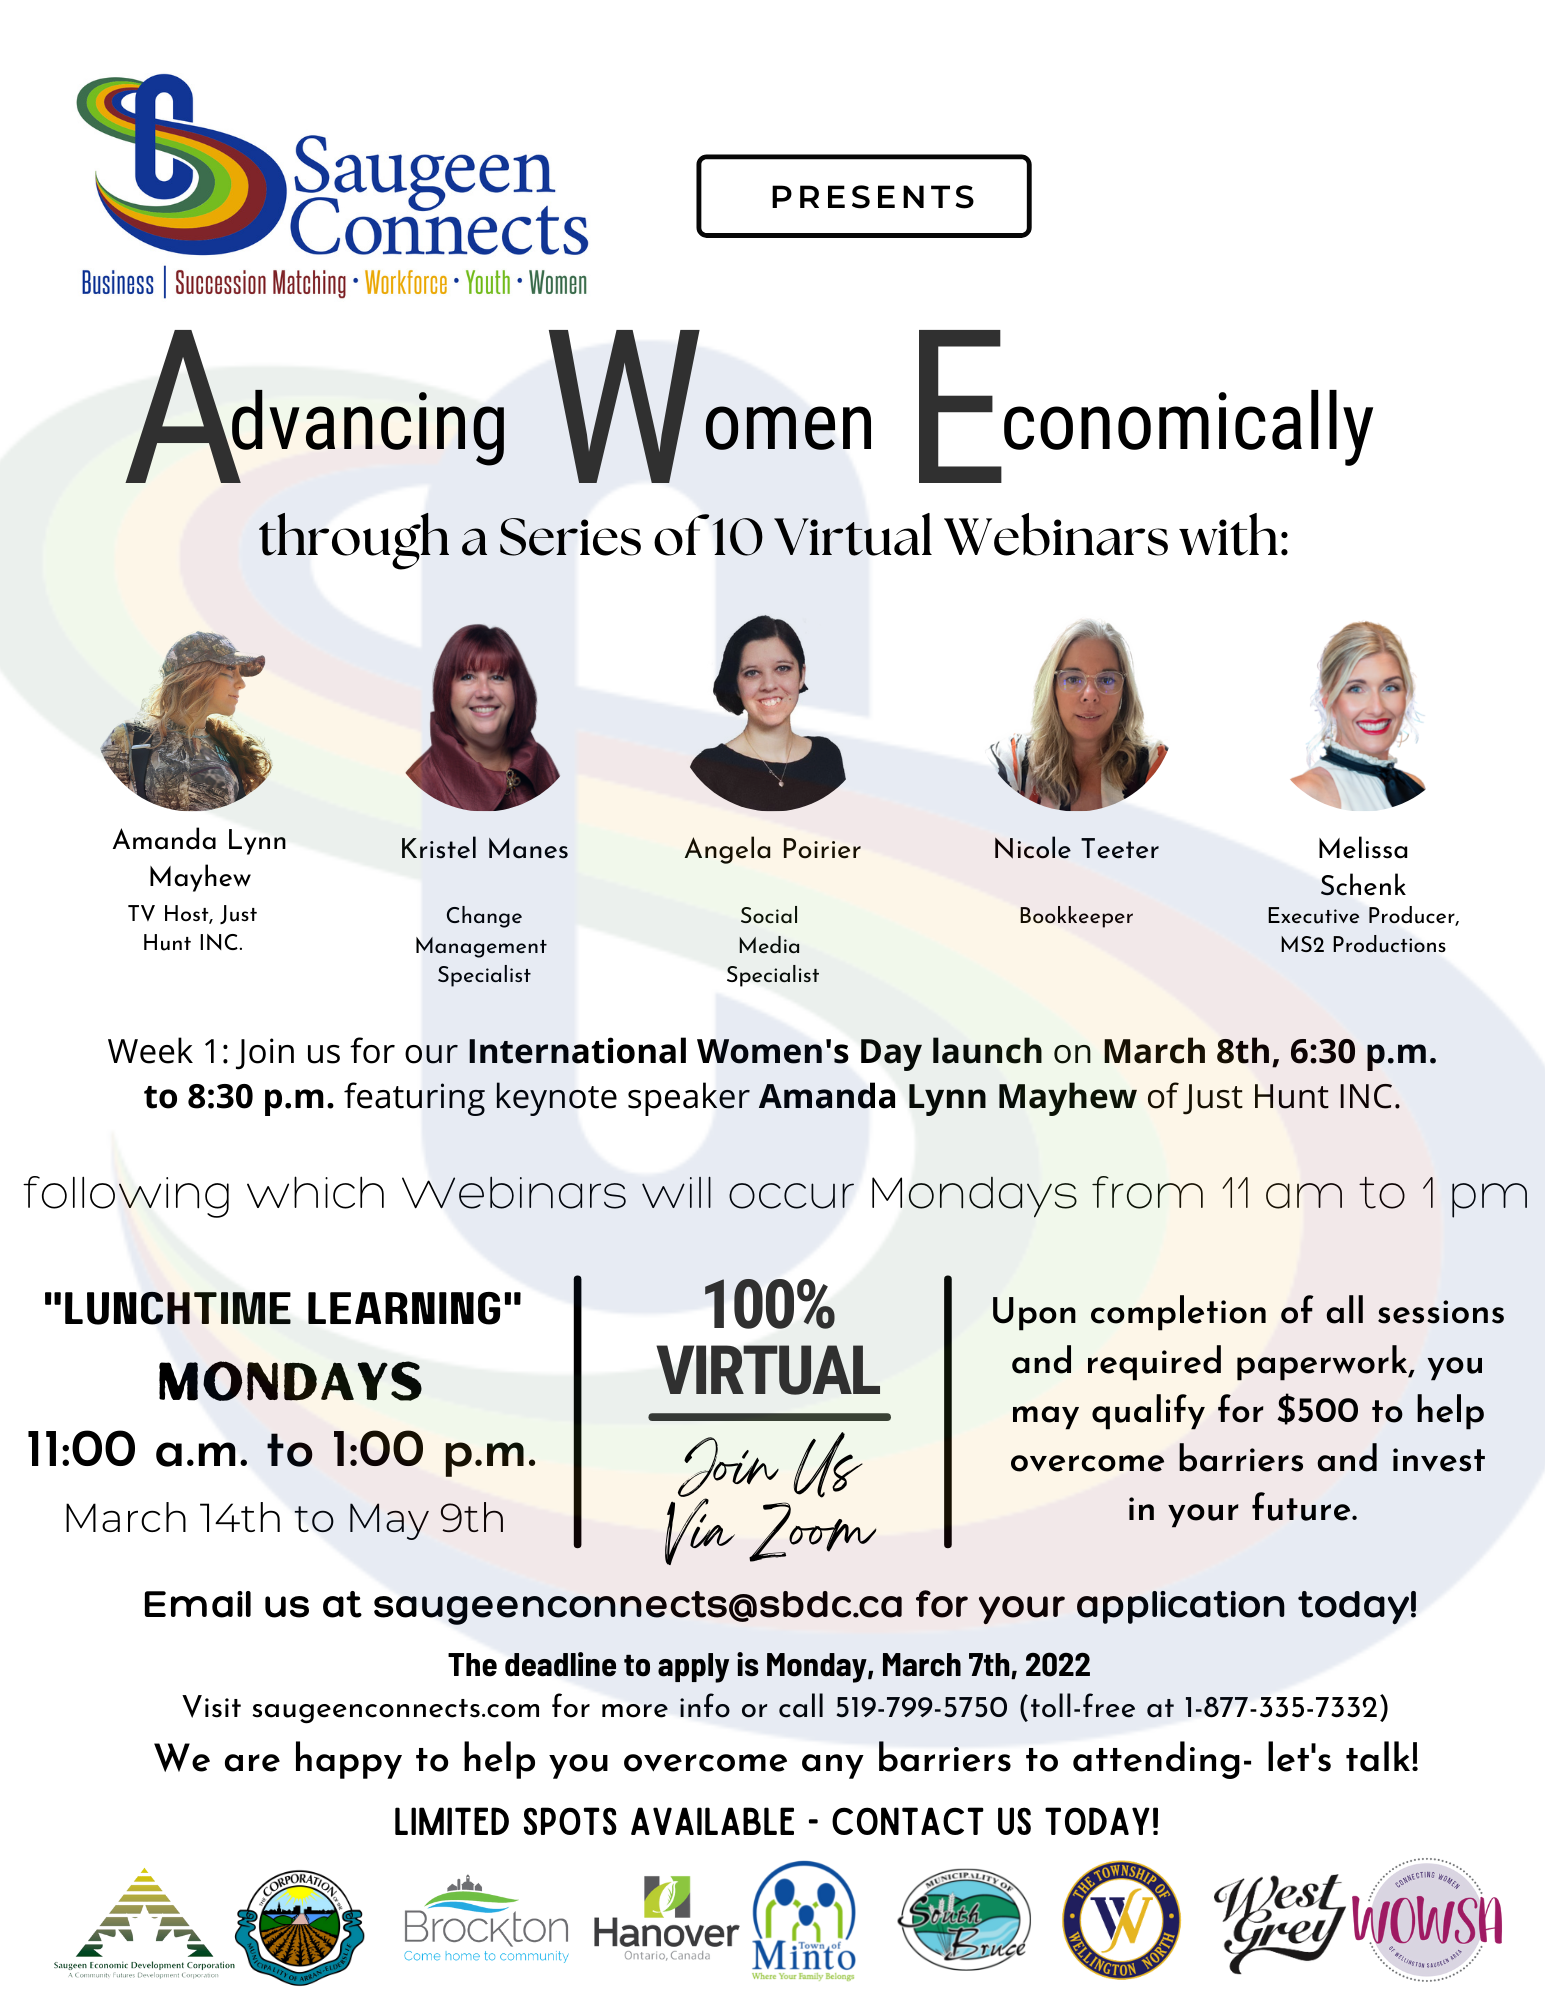 Saugeen Connects Advancing Women Economically Series